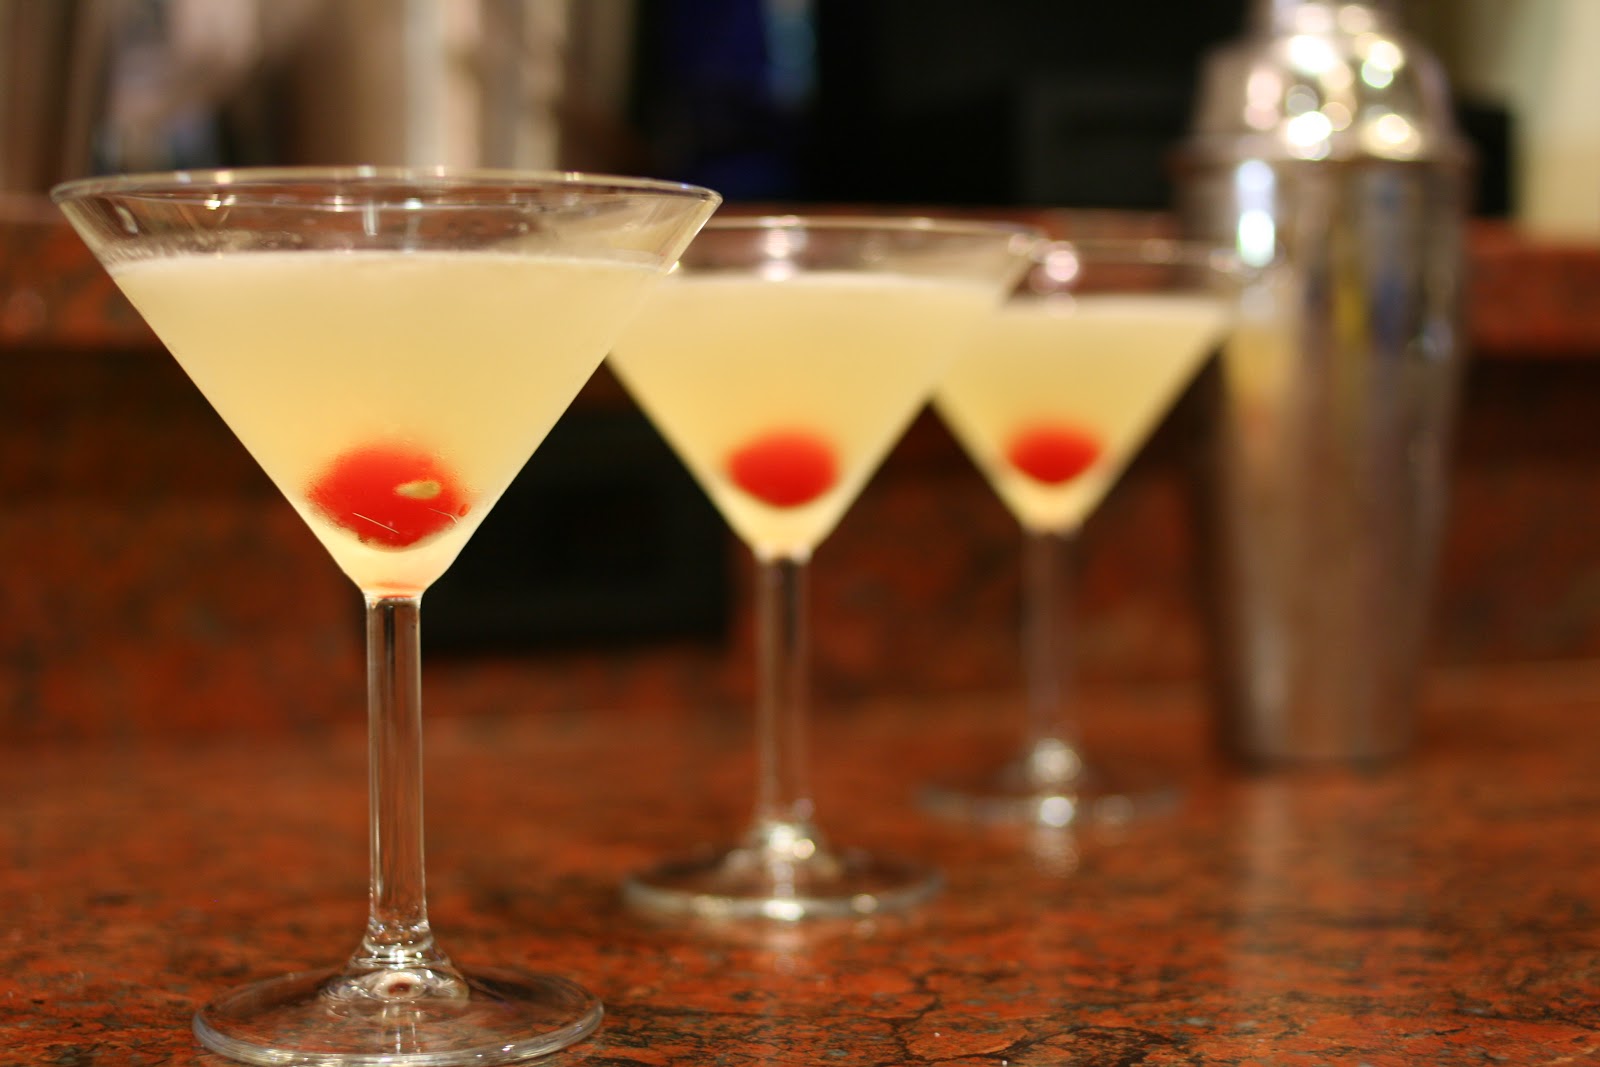 The Corpse Reviver #2.